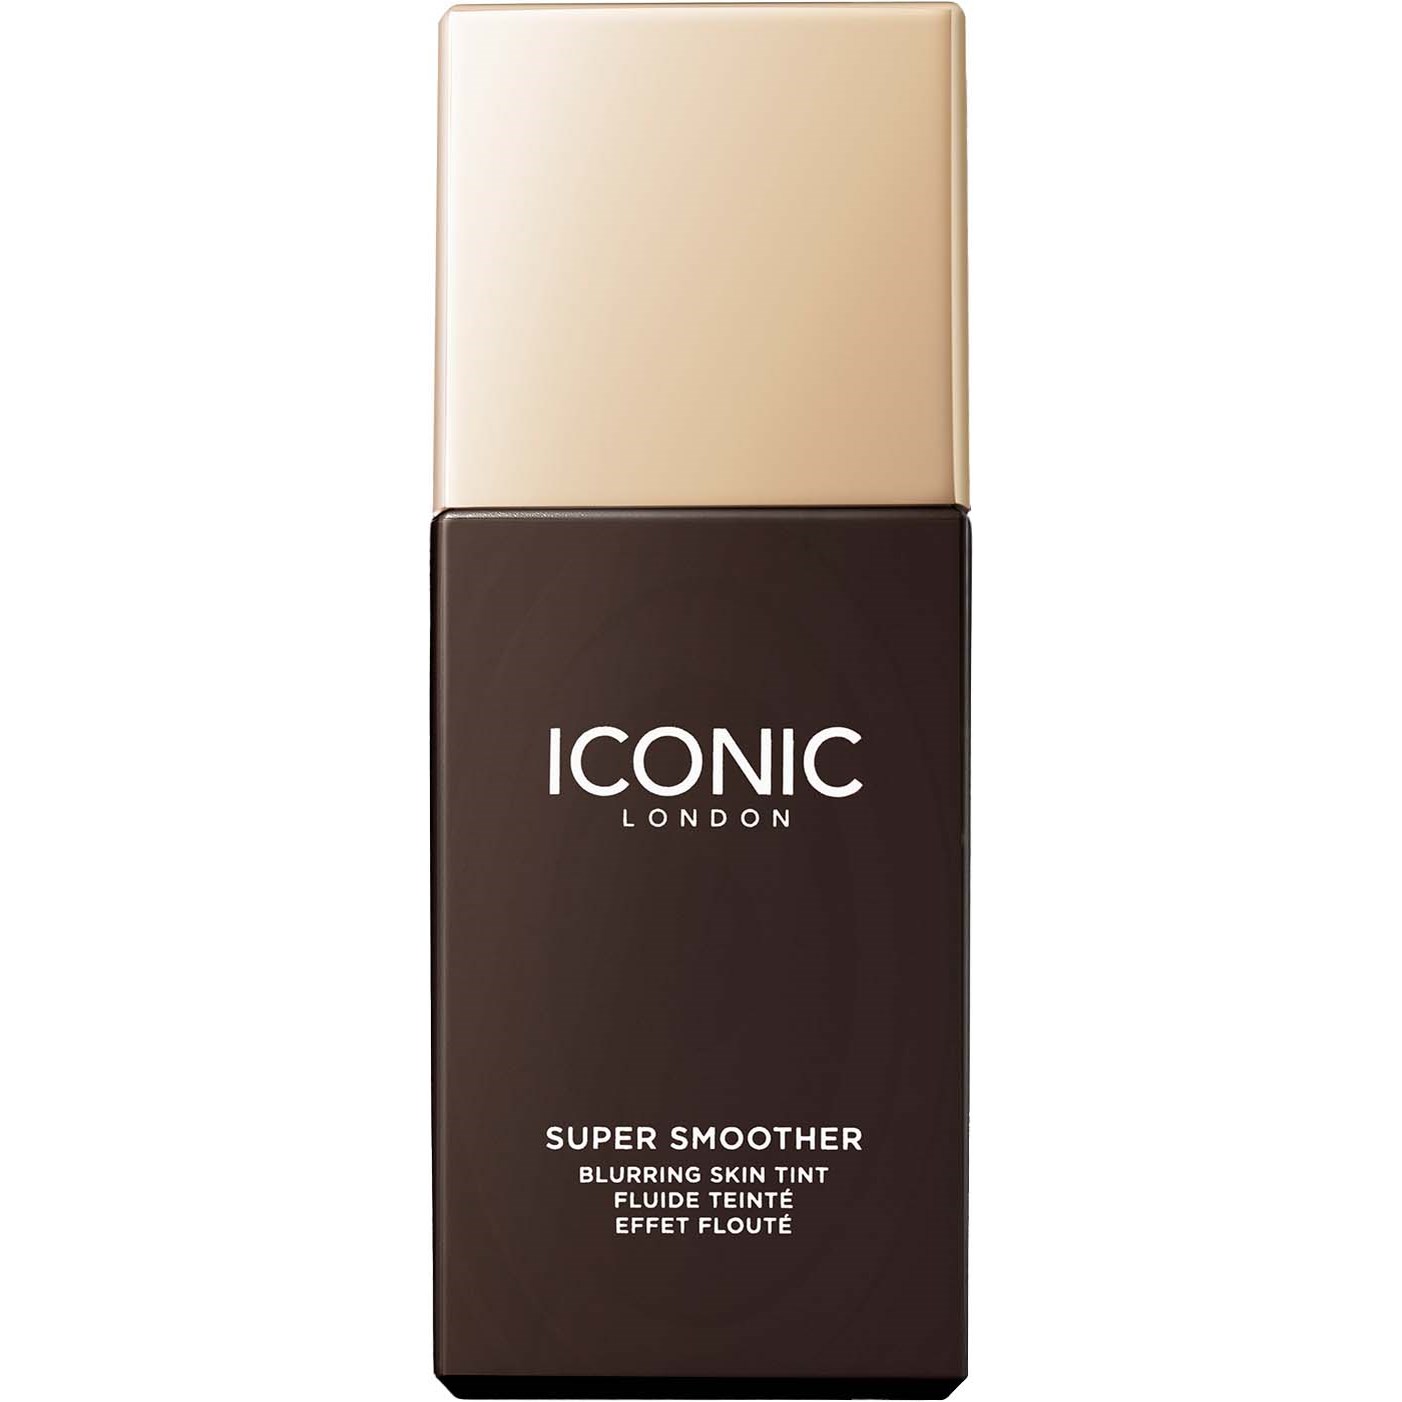 ICONIC London Super Smoother Blurring Skin Tint Neutral Rich